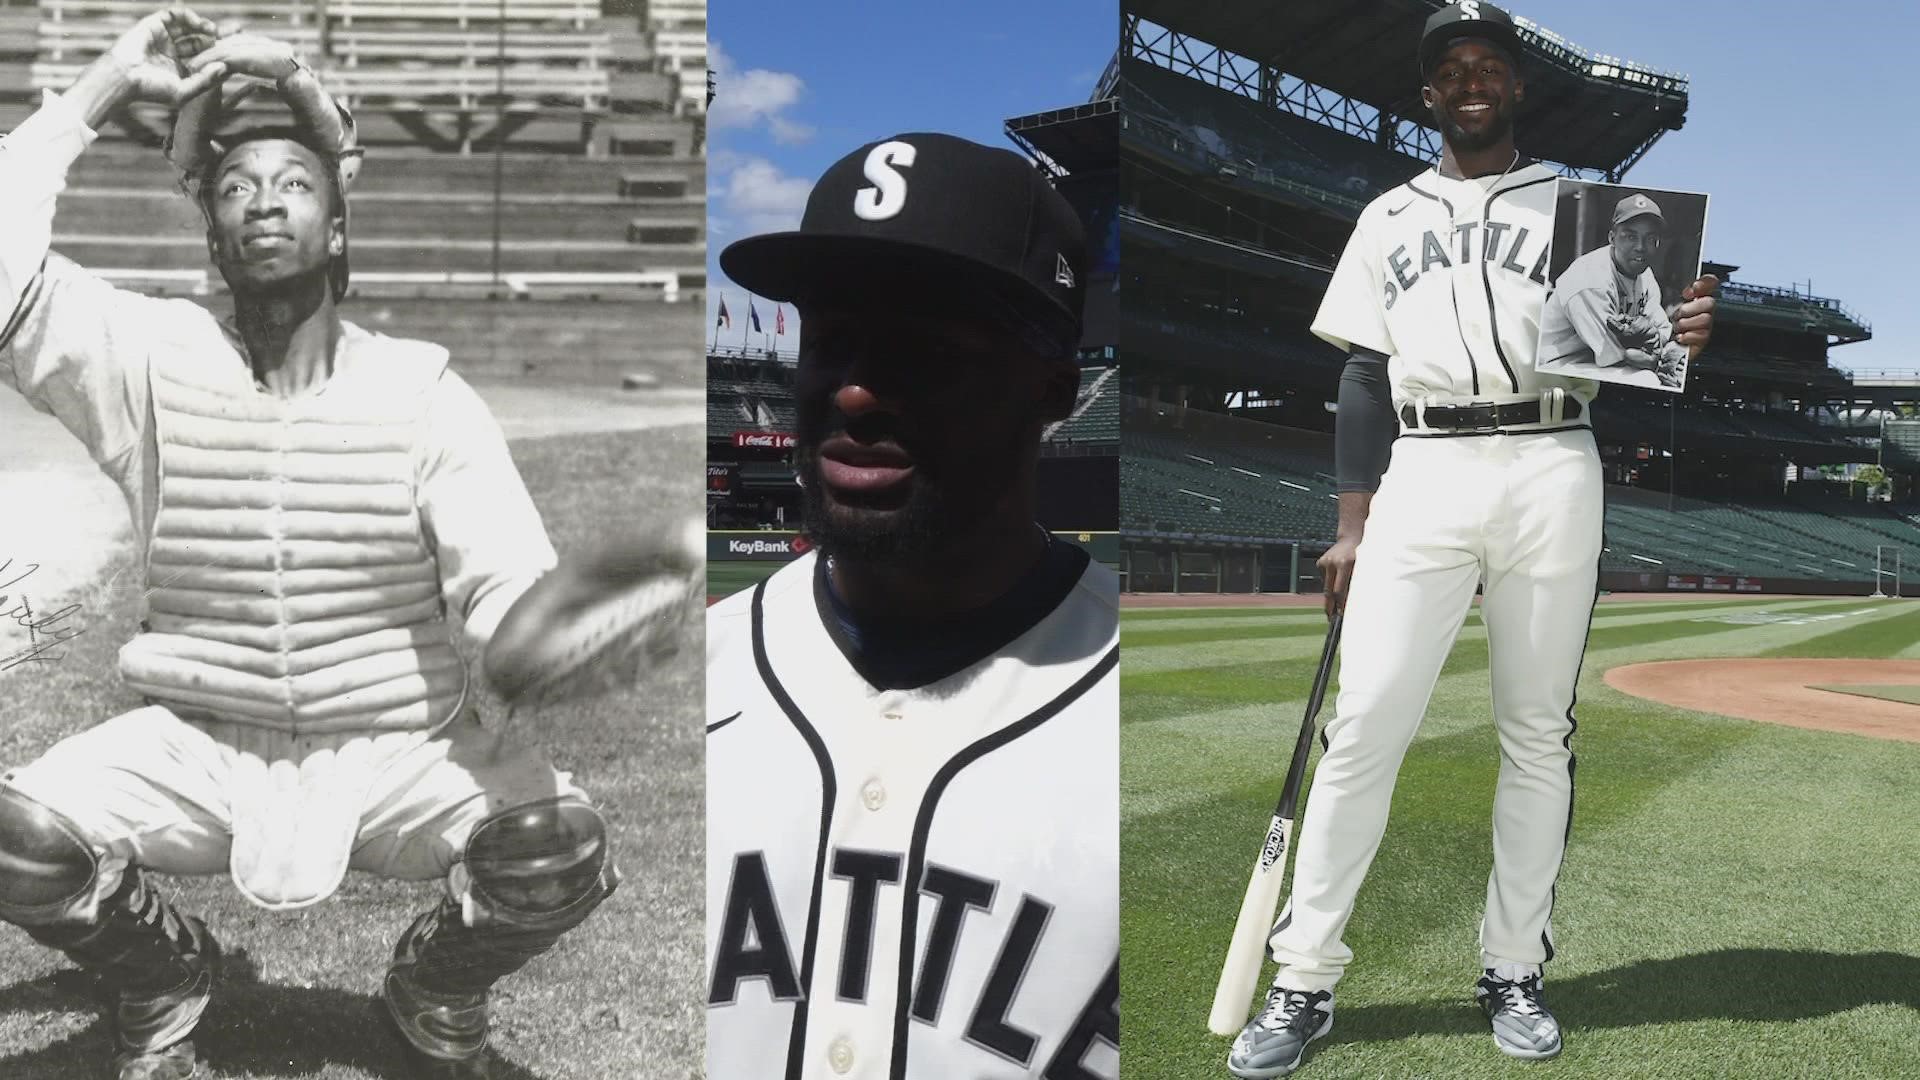 The Seattle Mariners will host a salute to the Negro Leagues and Juneteenth celebrations this weekend.